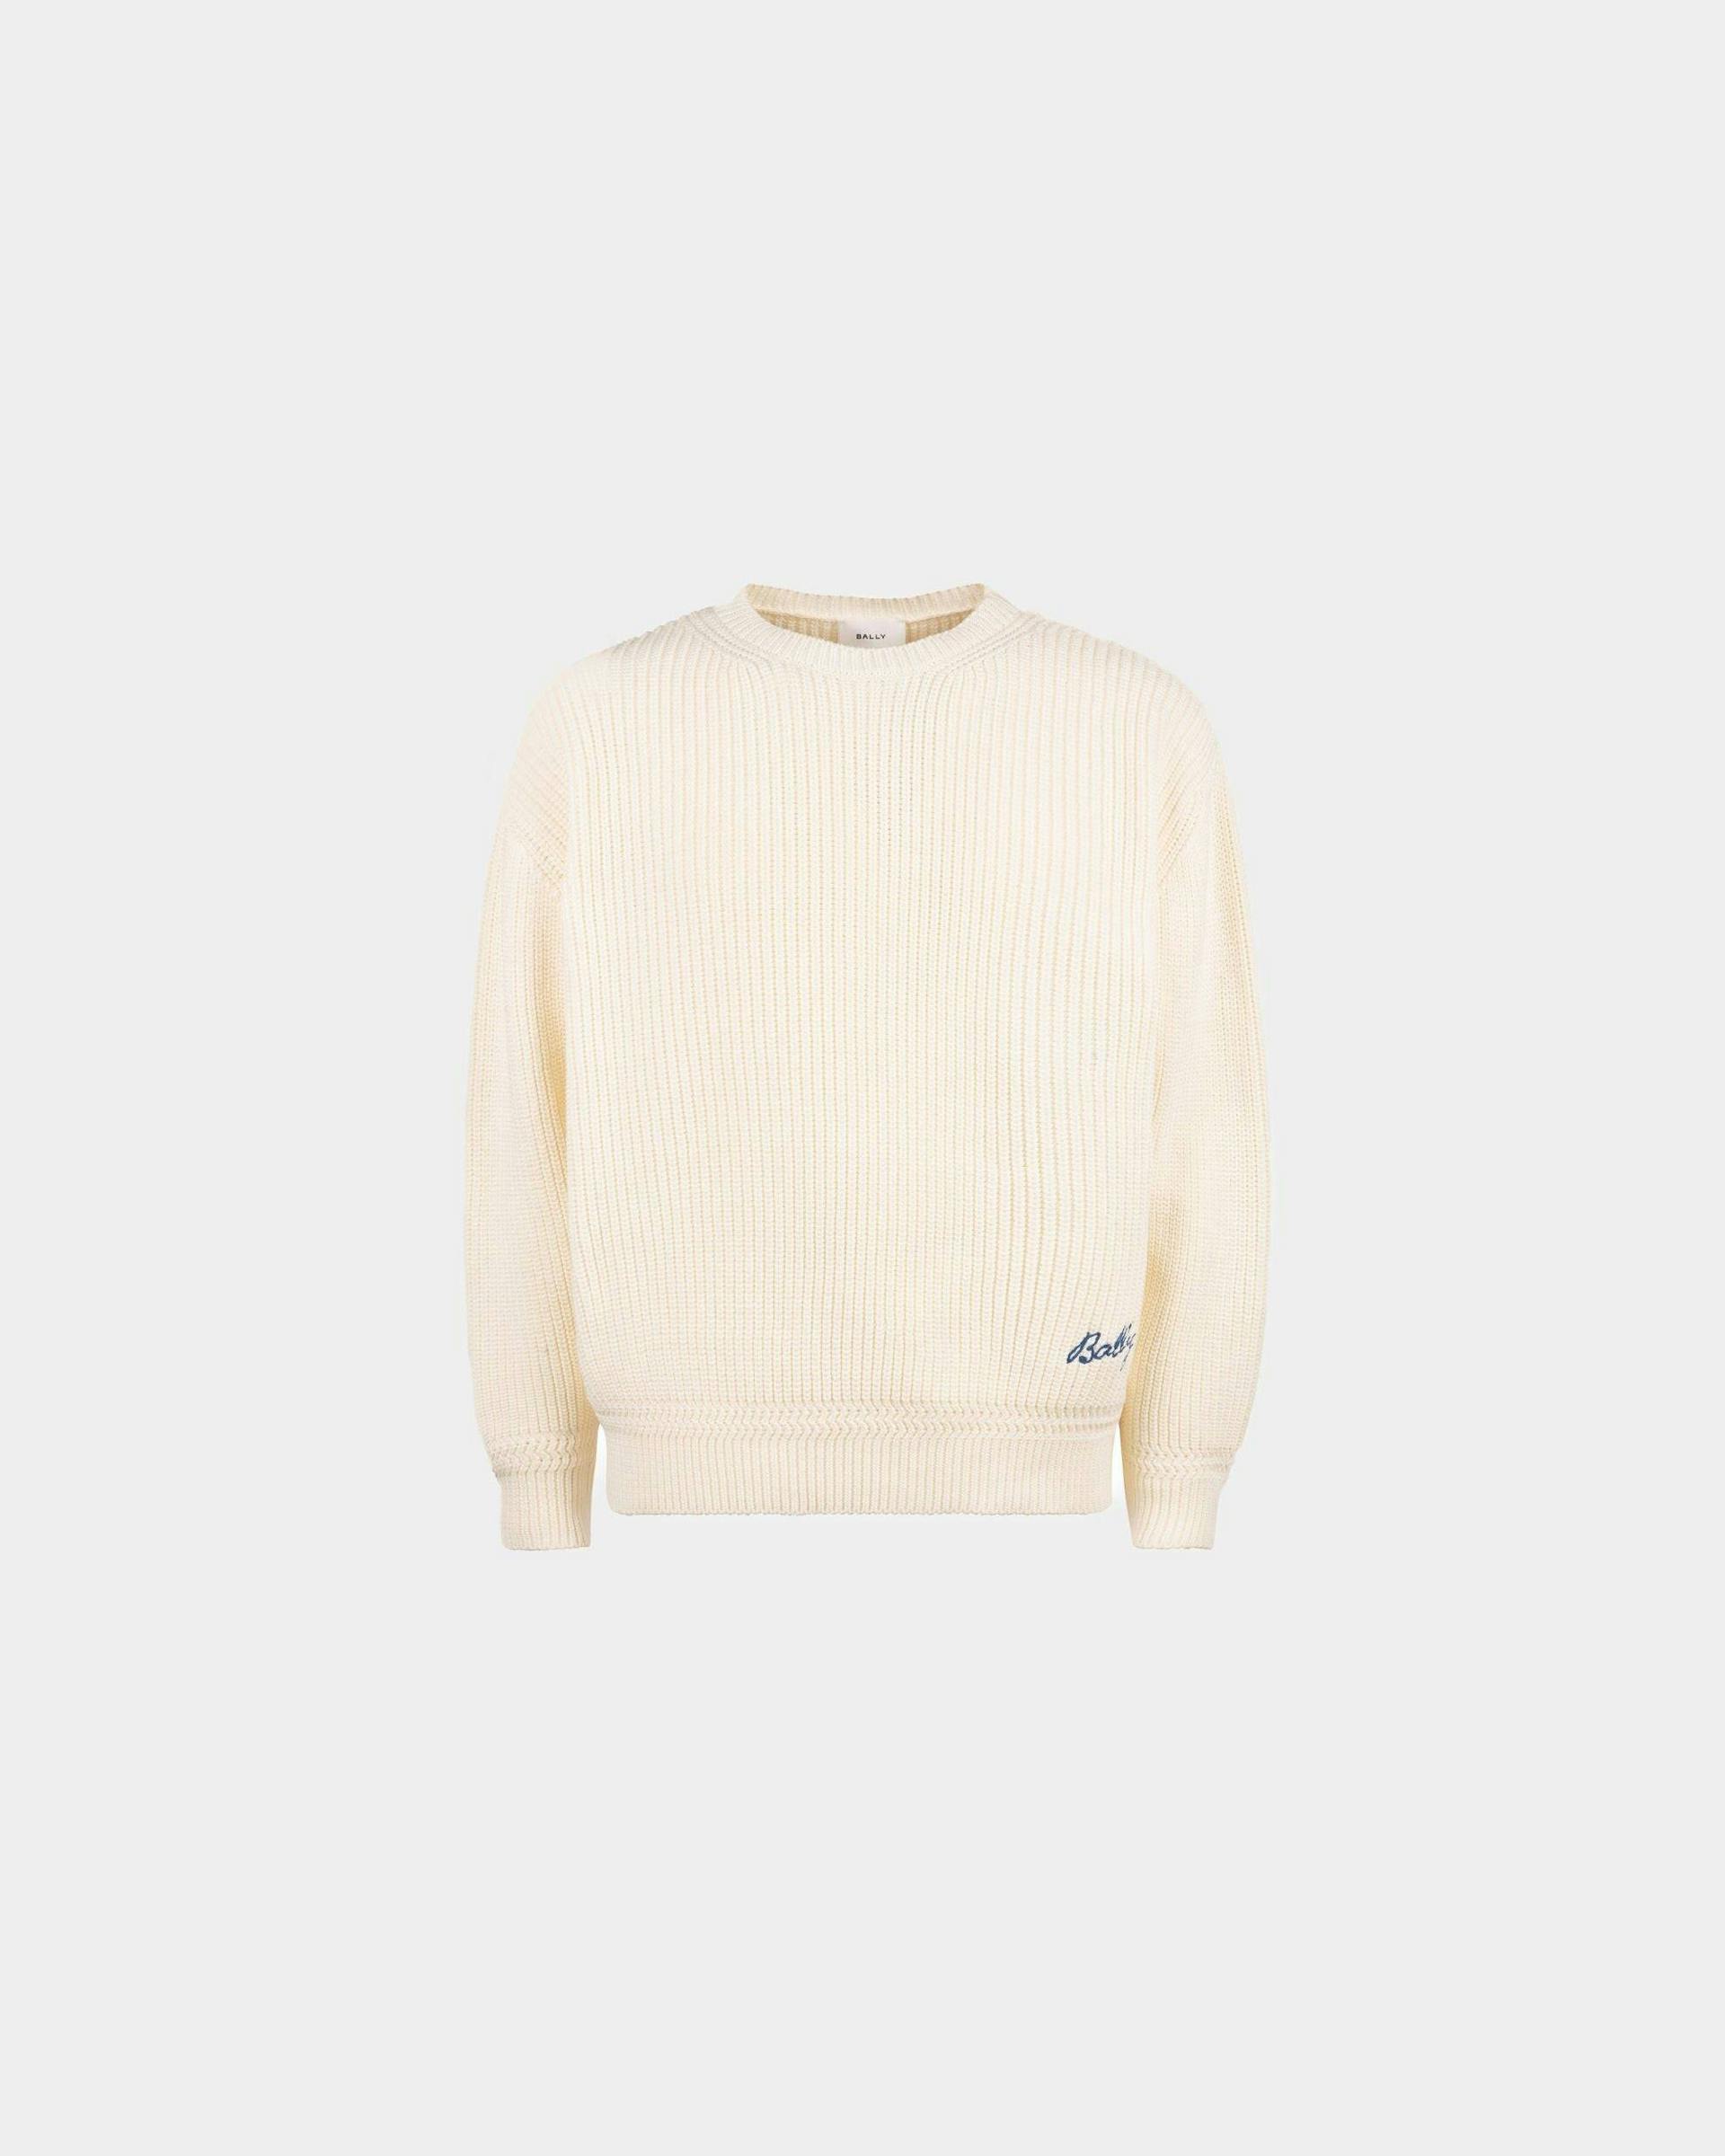 Men's Crewneck Sweater in Cotton | Bally | Still Life Front